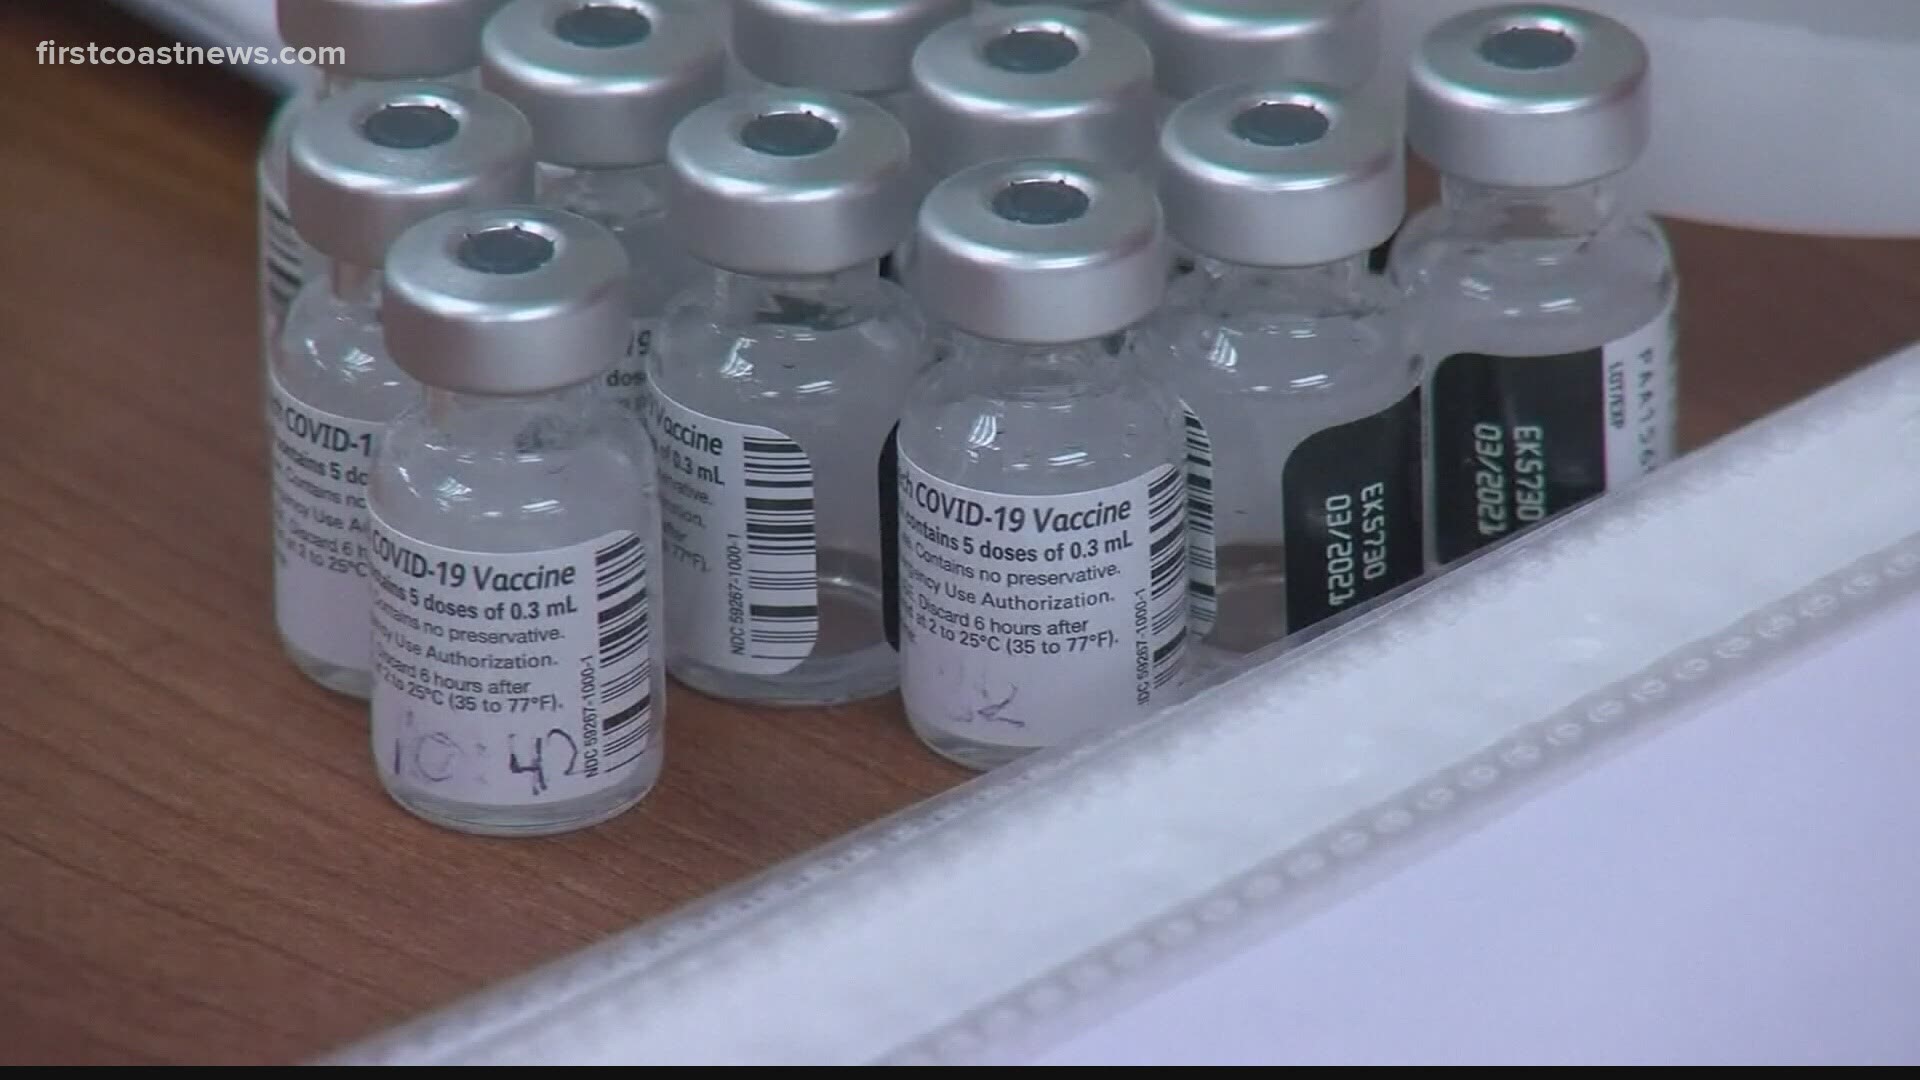 Local doctors provide insight on early vaccine success research